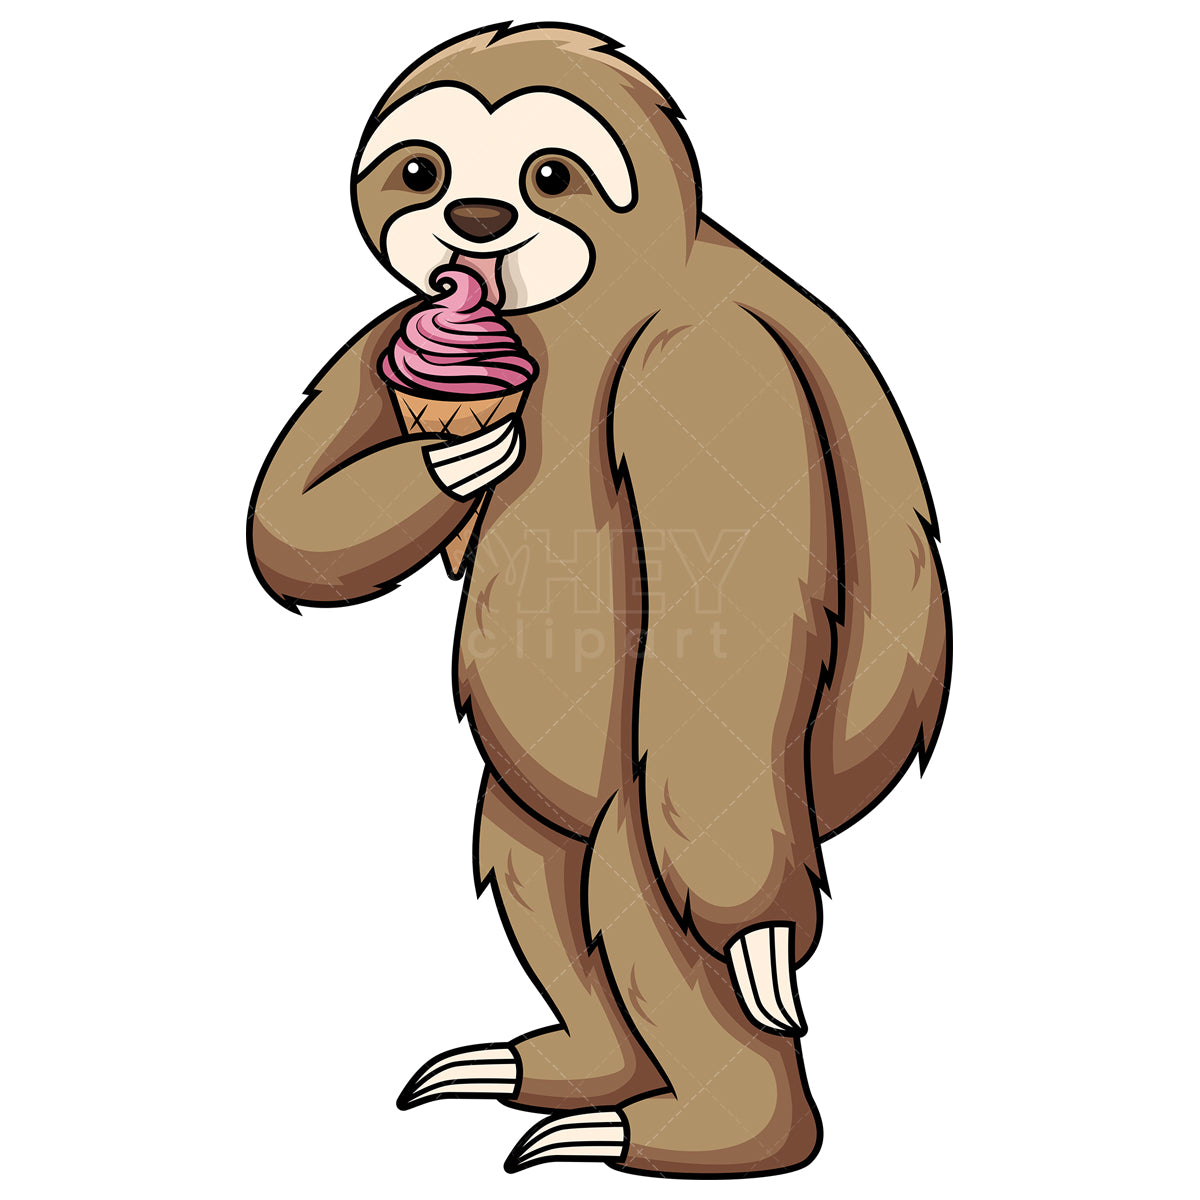 Royalty-free stock vector illustration of a sloth eating ice cream.